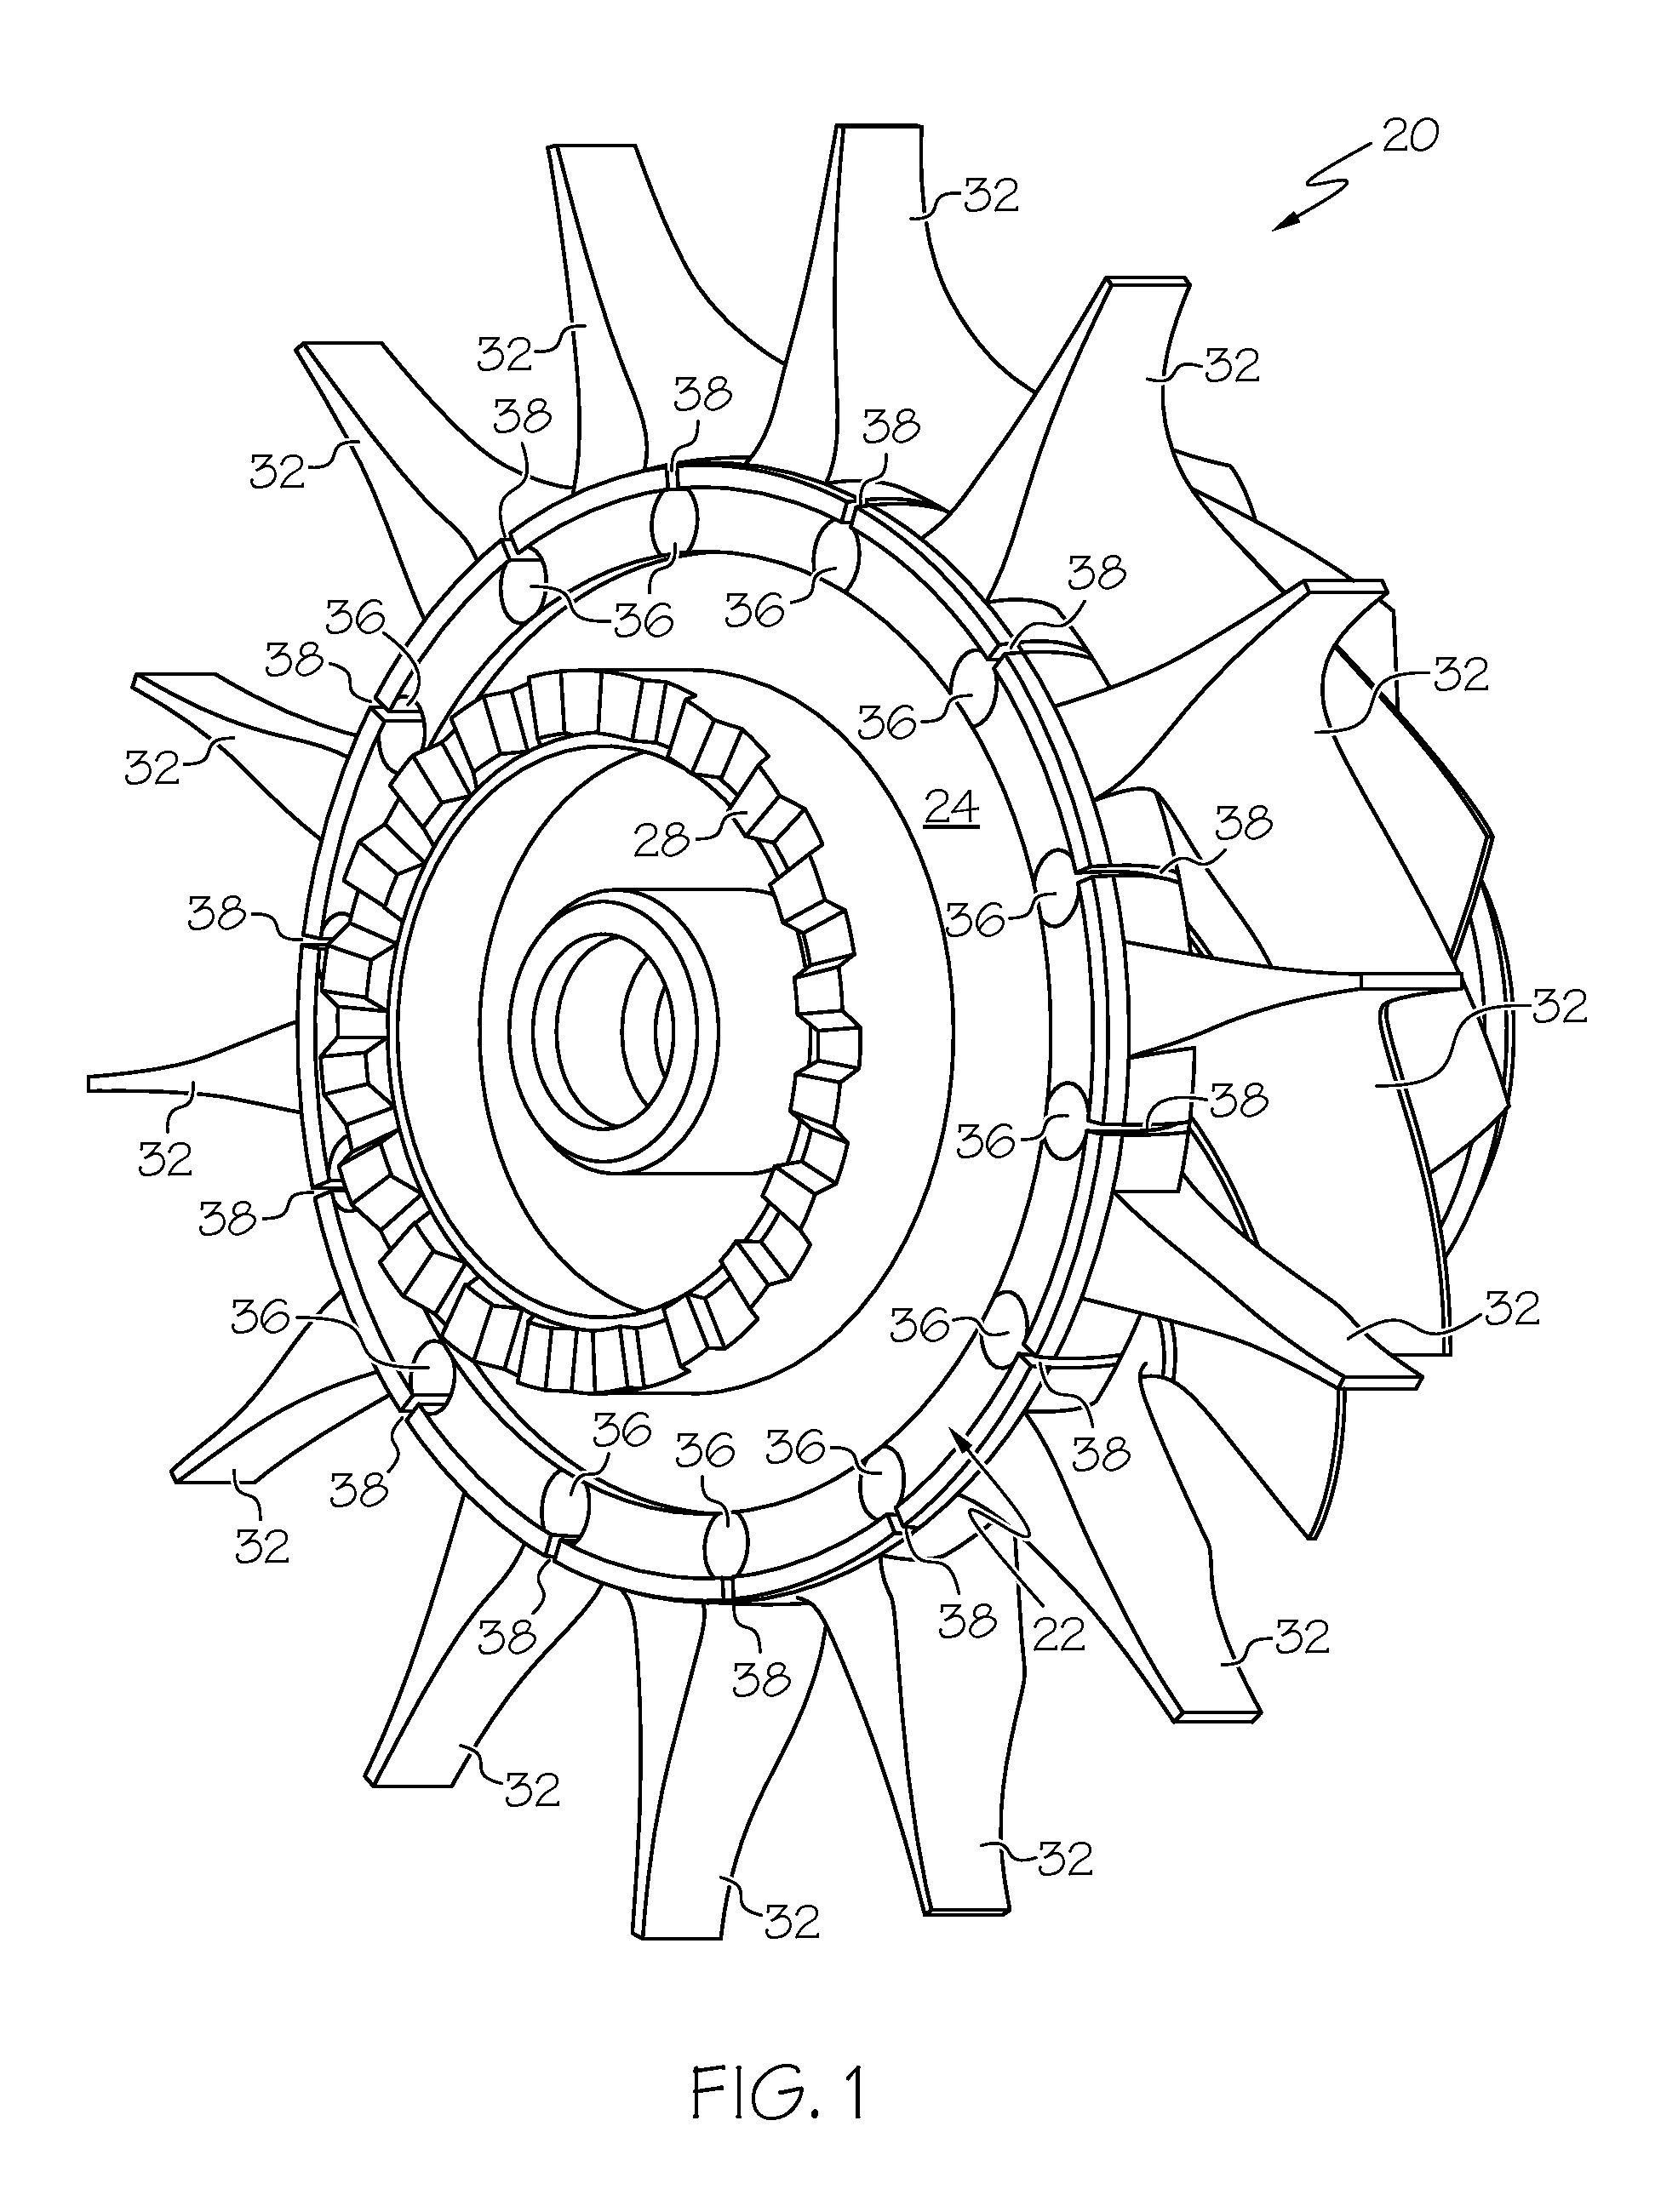 Methods for producing gas turbine engine rotors and other powdered metal articles having shaped internal cavities